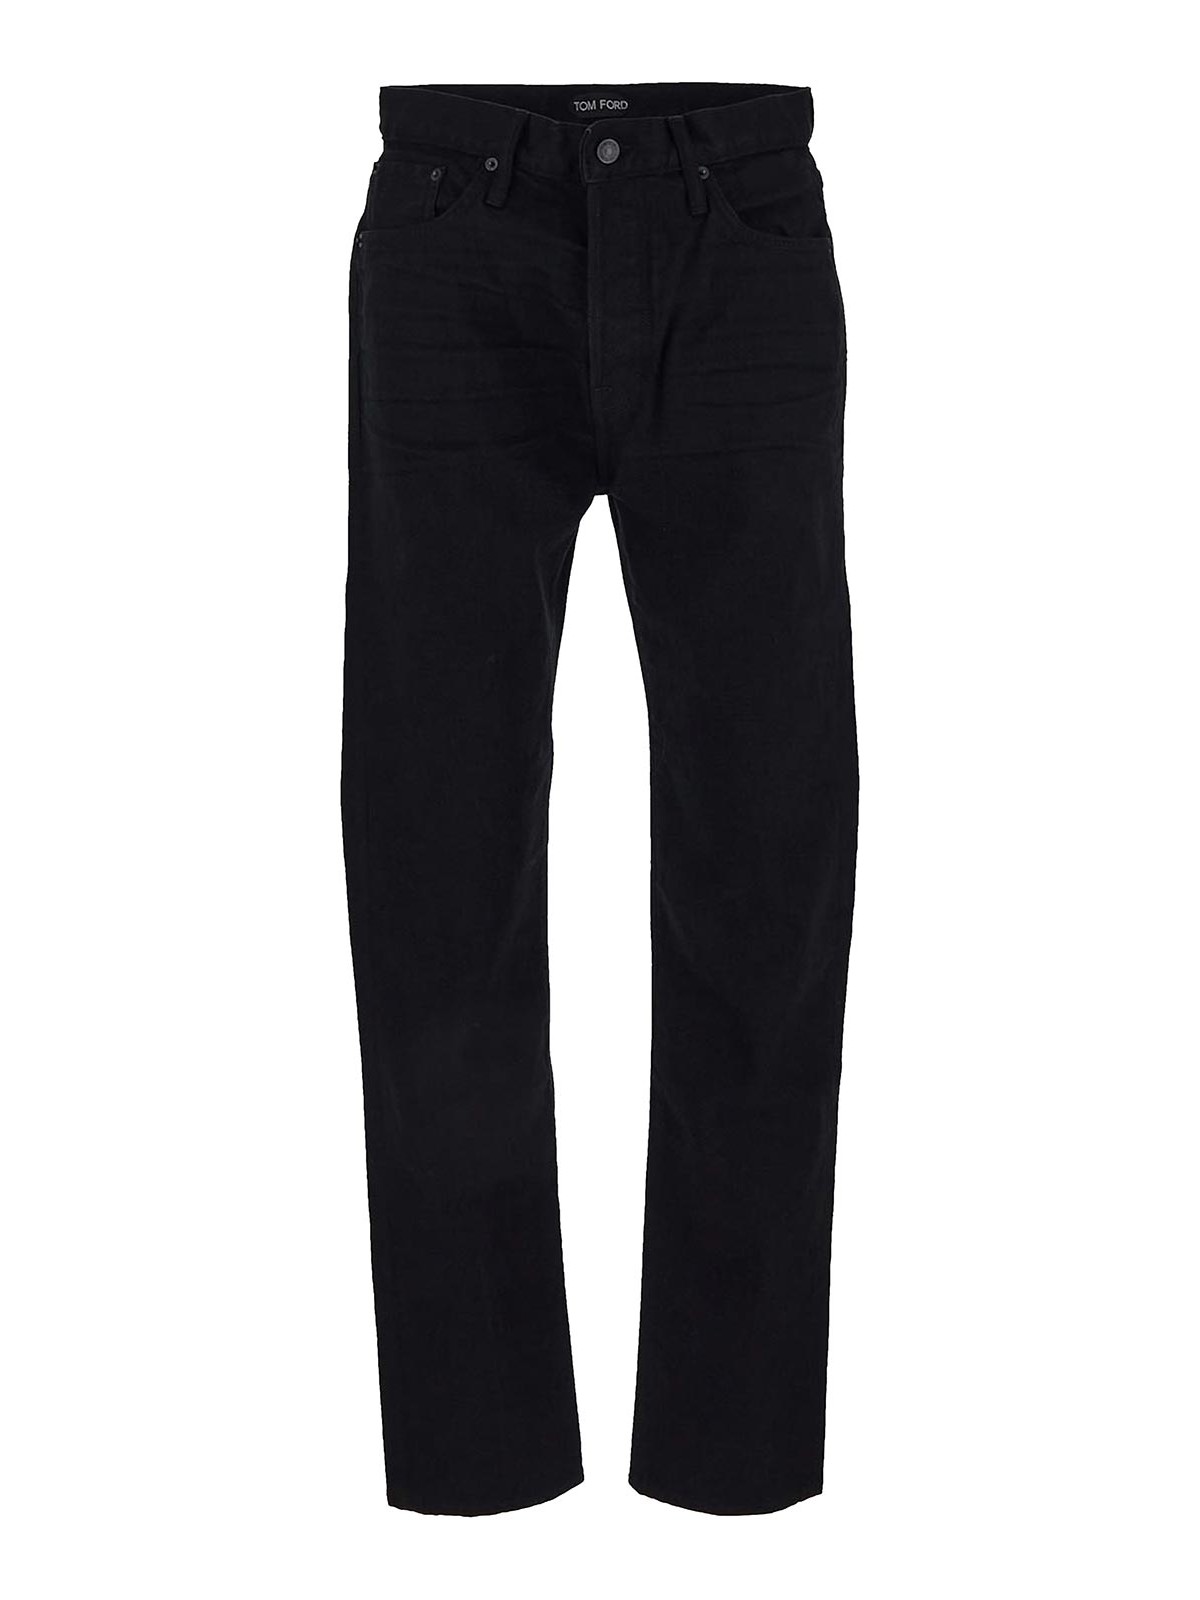 Tom Ford Black Jeans With Side Pockets